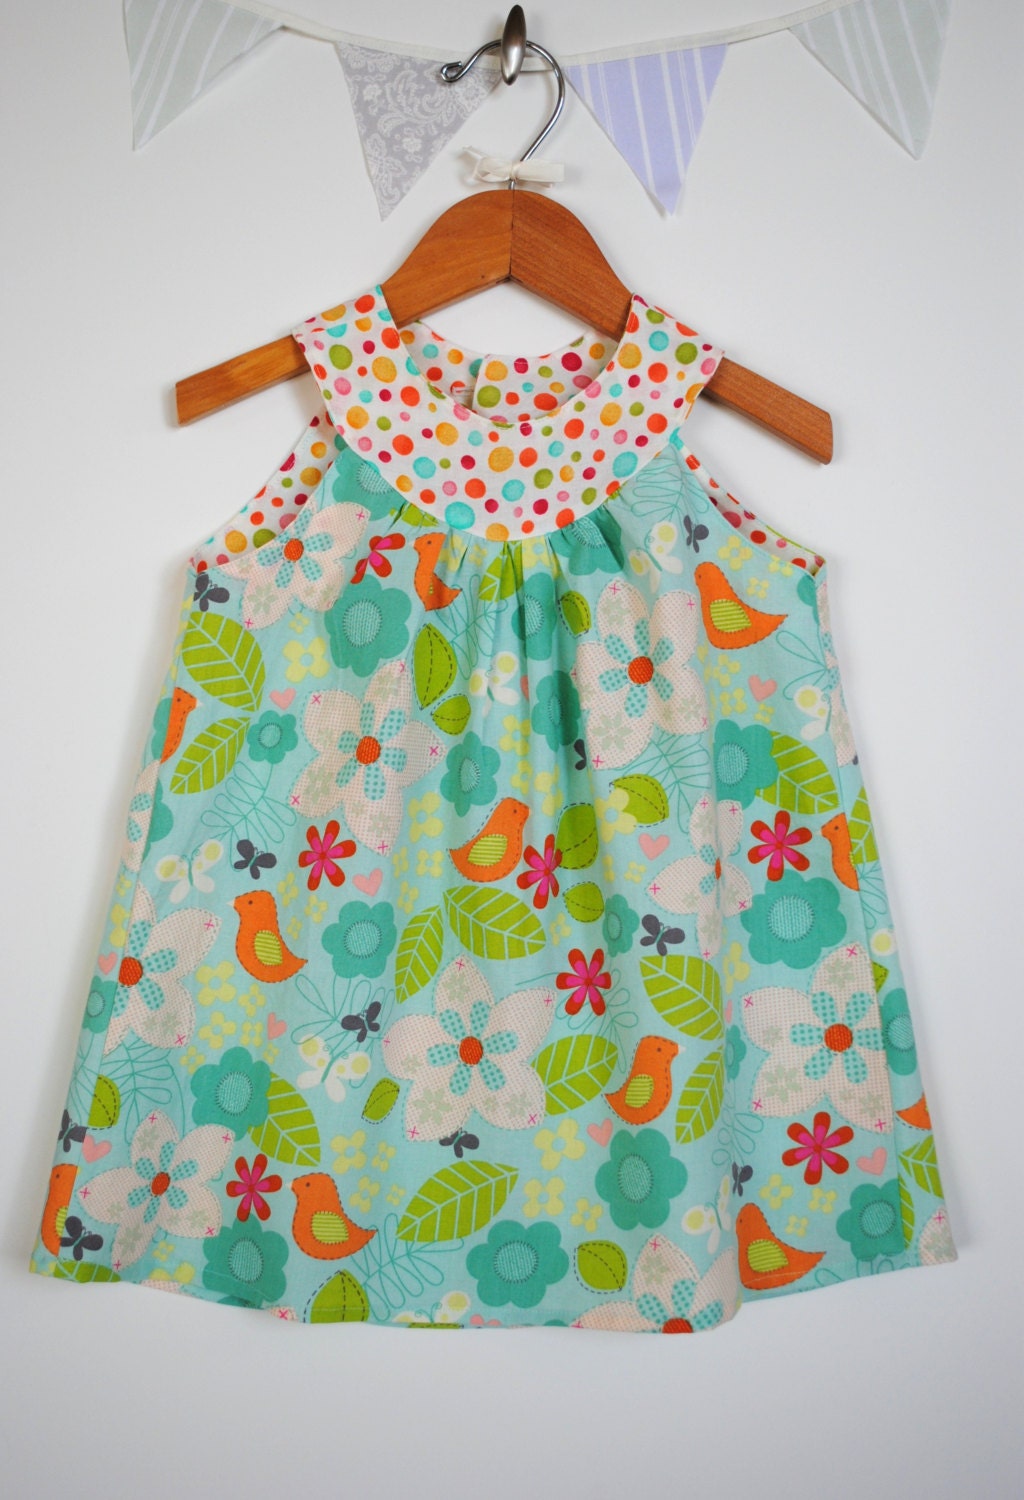 Girls A Line Dress, Round Collar, Sleeveless Tunic in Bird Fabric, Flowers, Leaves, Blue, Green, Orange, Polka Dots, Size 12-18 Months to 6